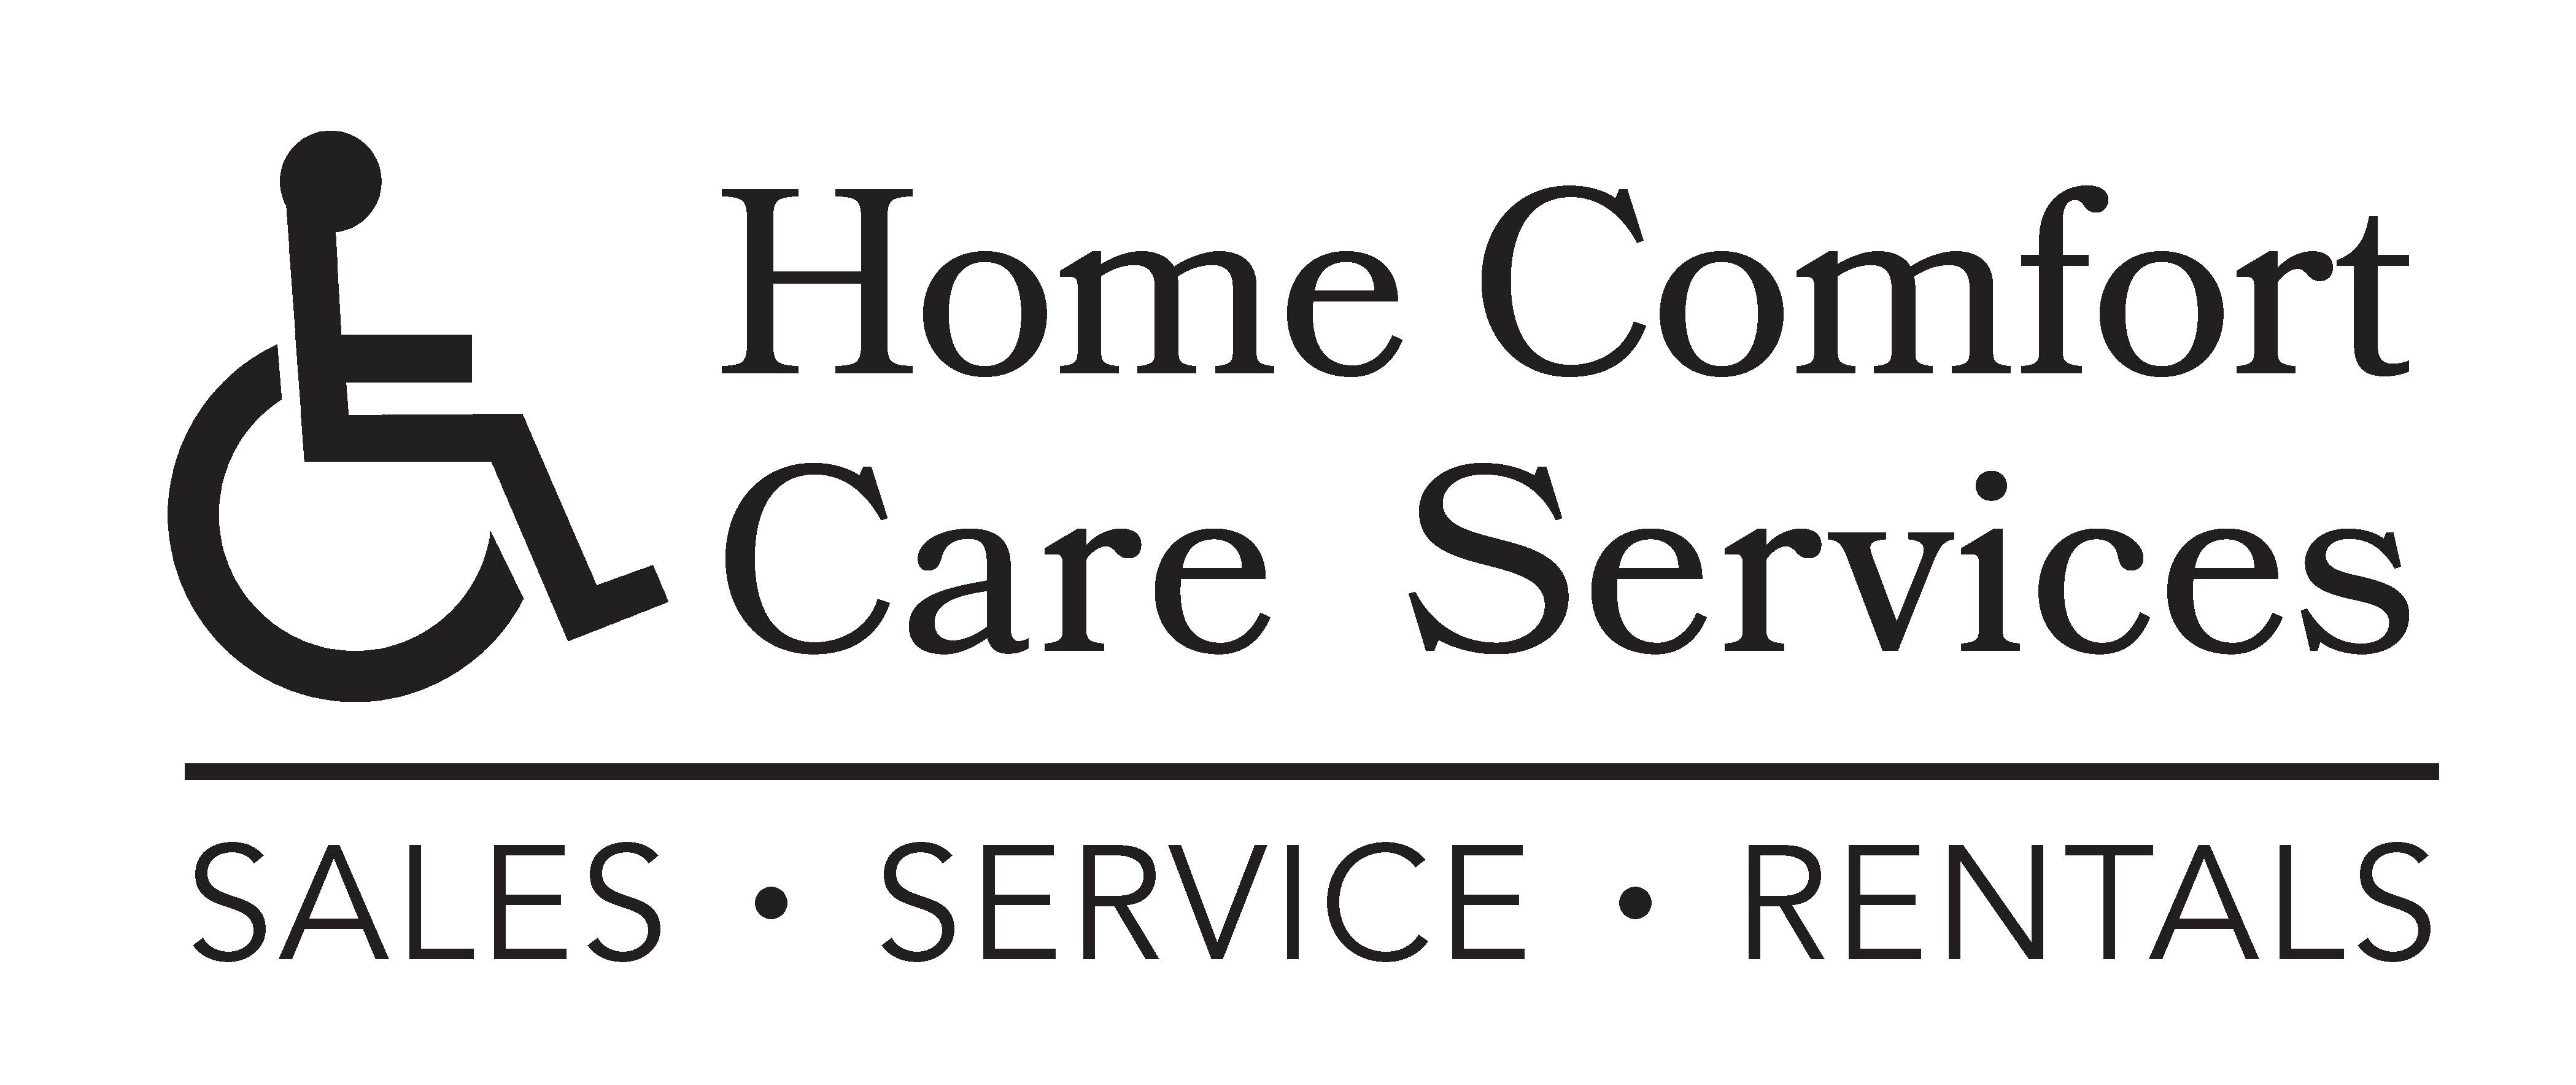 Home Comfort Care Services